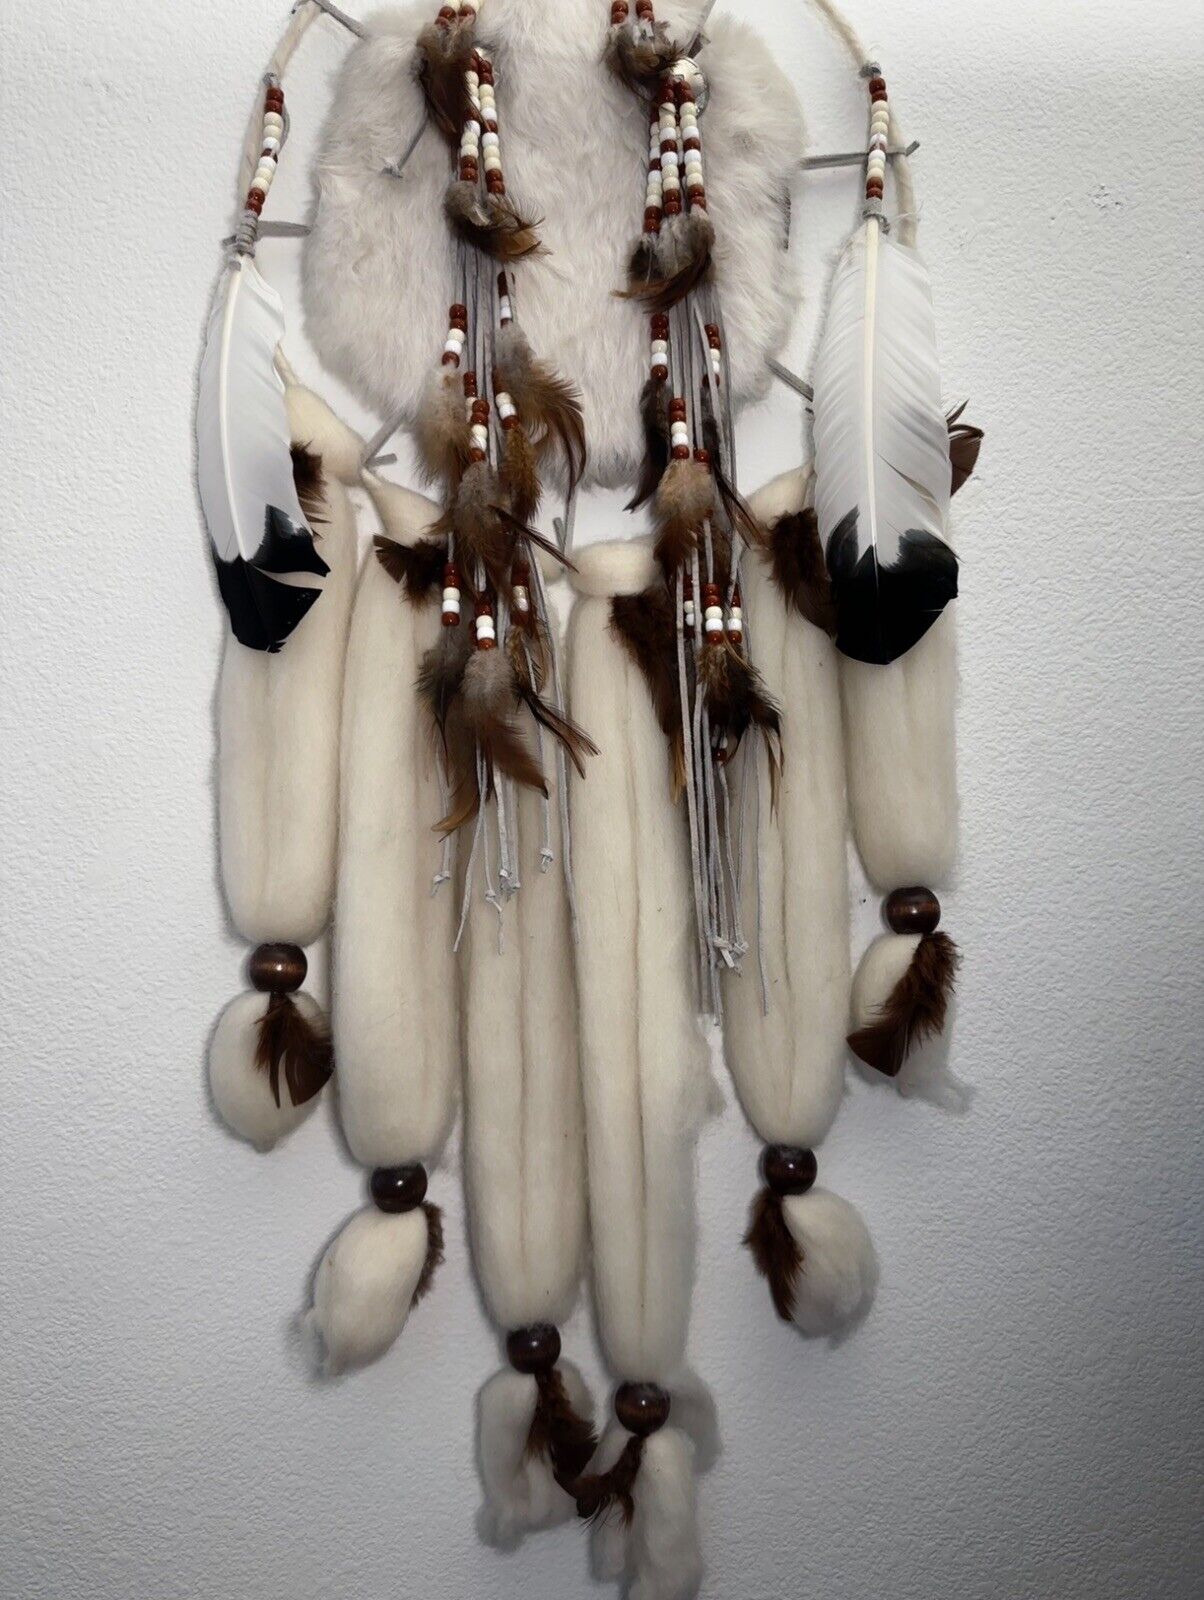 Vintage Handmade Wool, Fur, Leather, Feathers, Beaded Dream Catcher